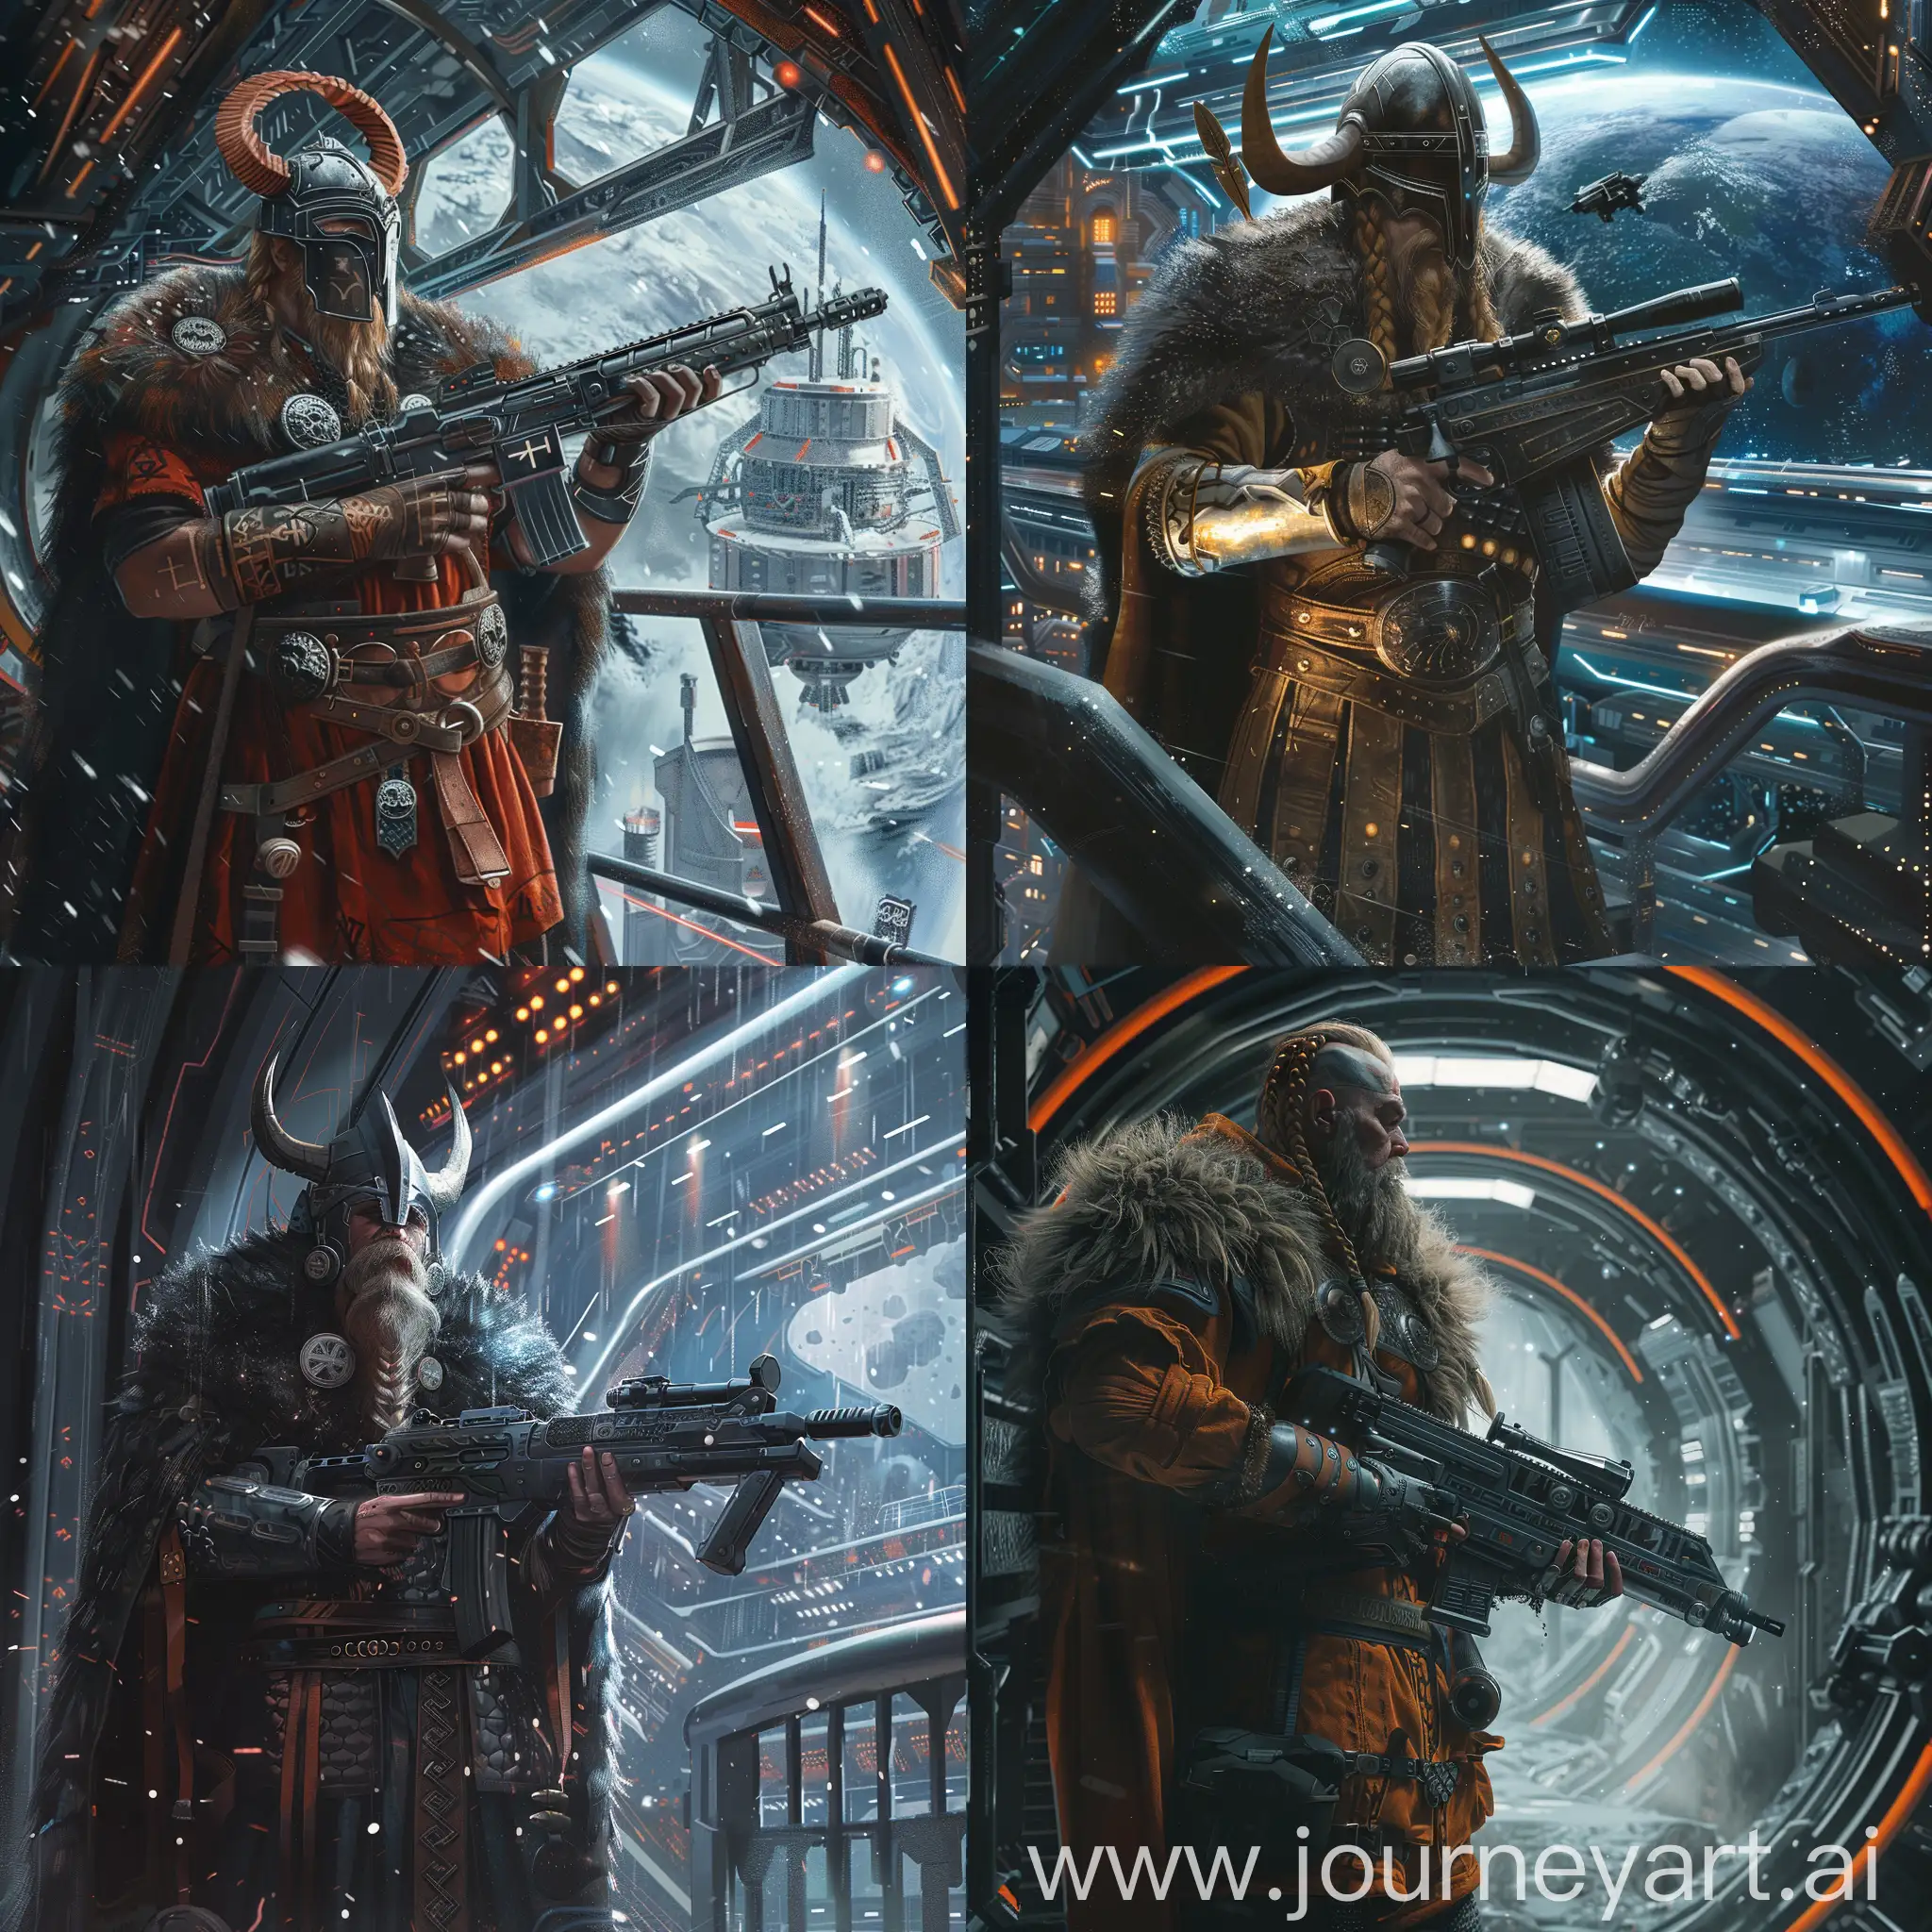 Viking-Warrior-with-SciFi-Assault-Rifle-in-Space-Station